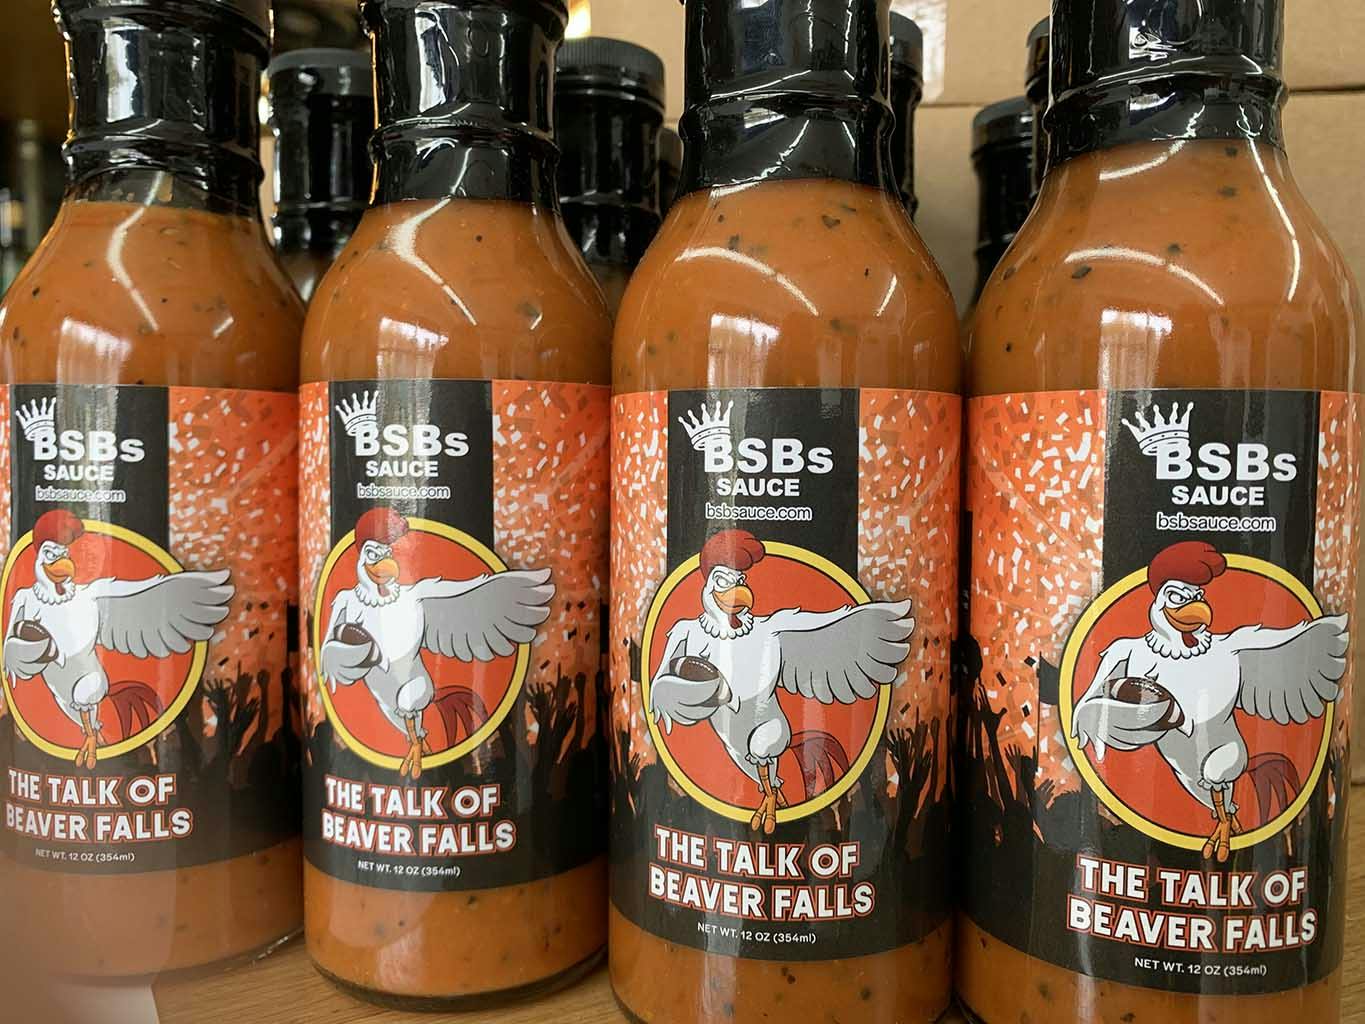 A bottle of The Talk of Beaver Falls wing sauce